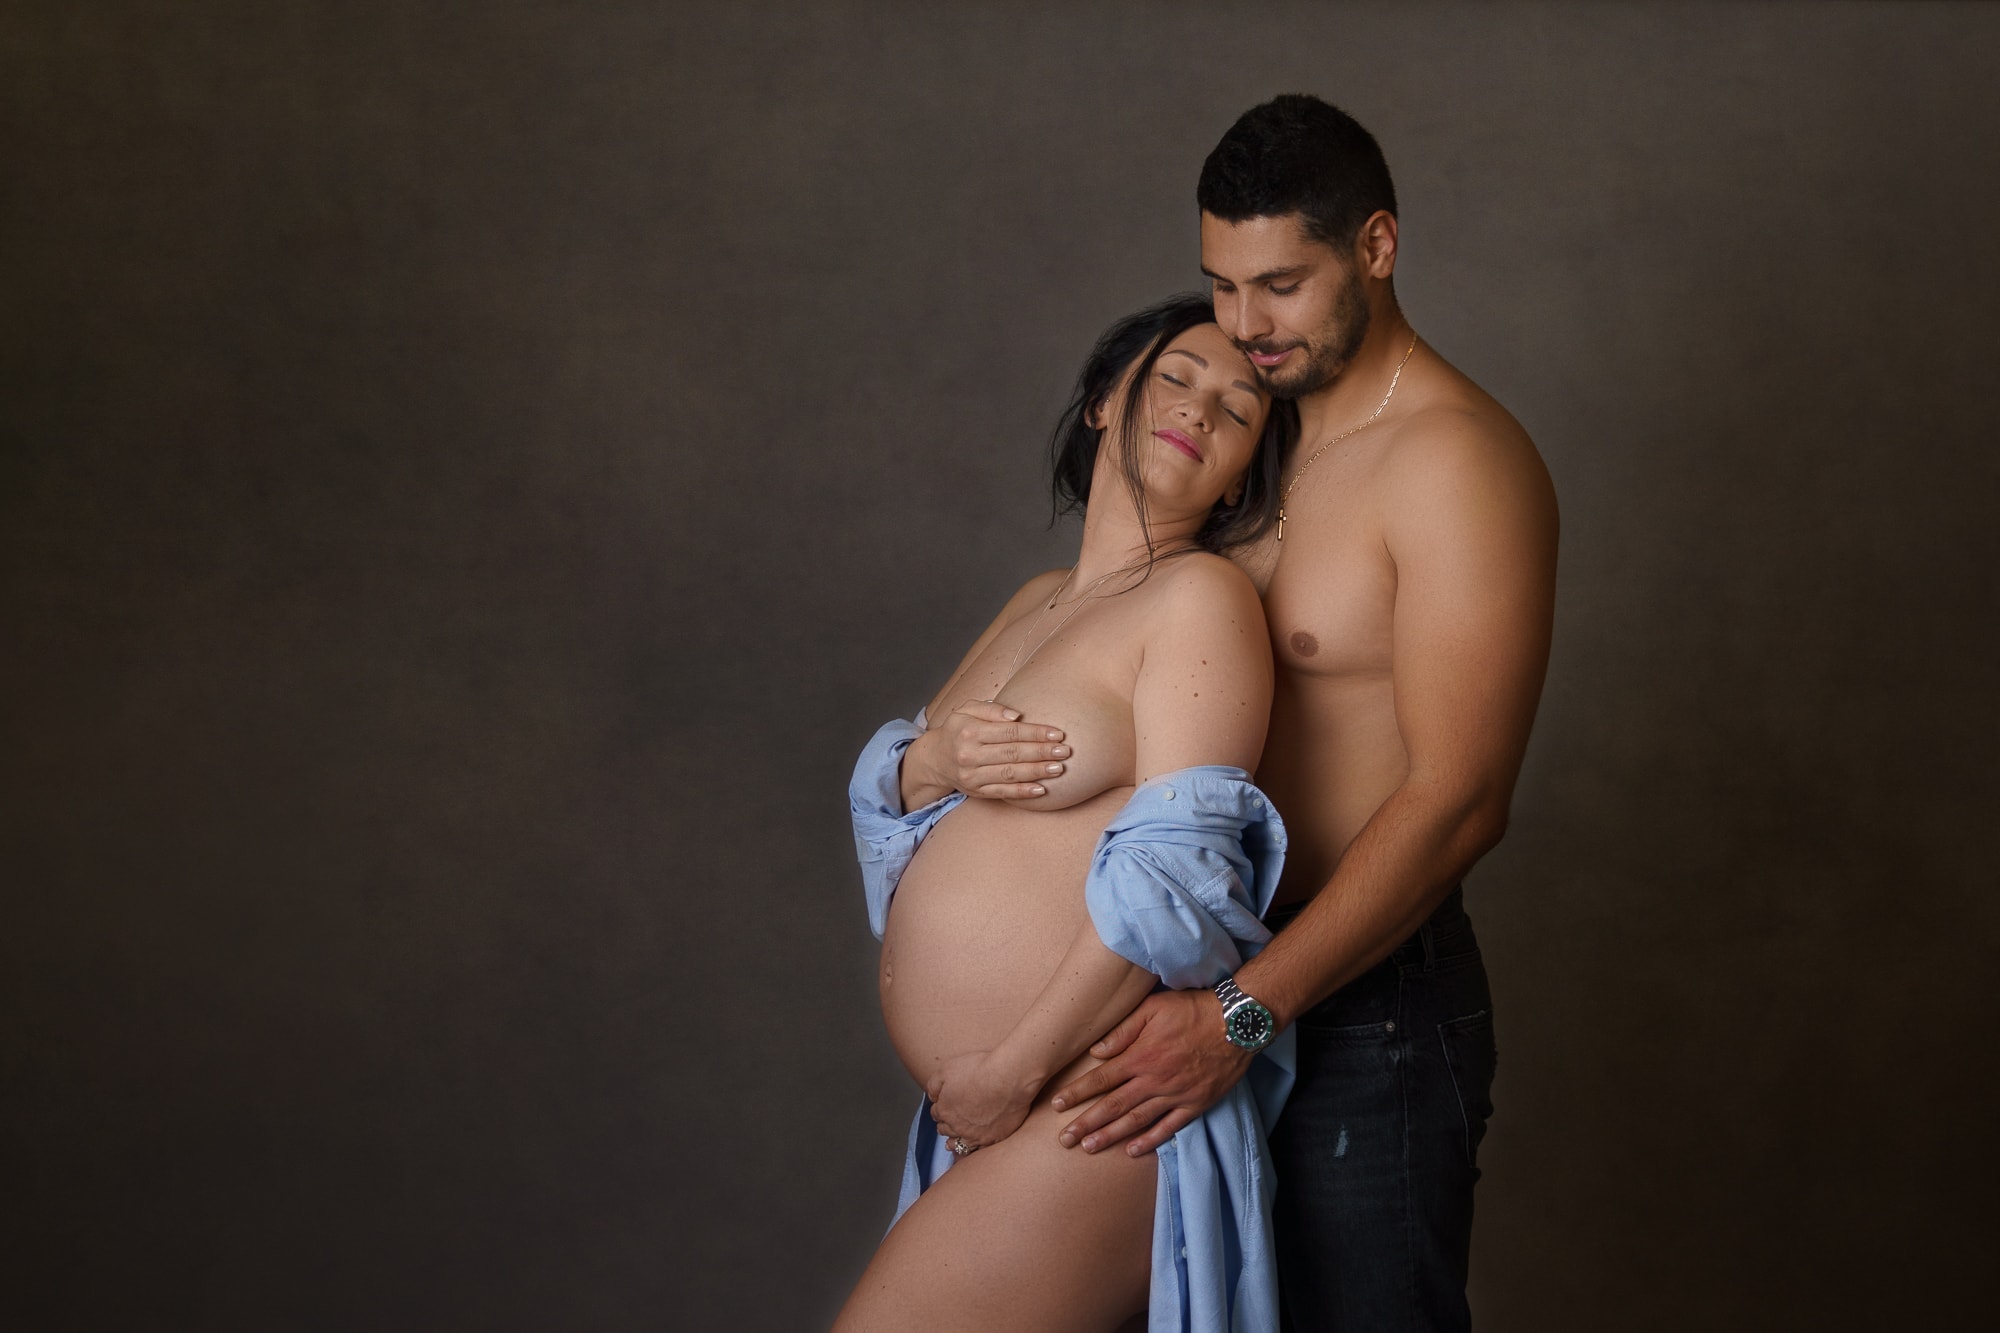 Maternity photography in Northamptonshire proud parents to be